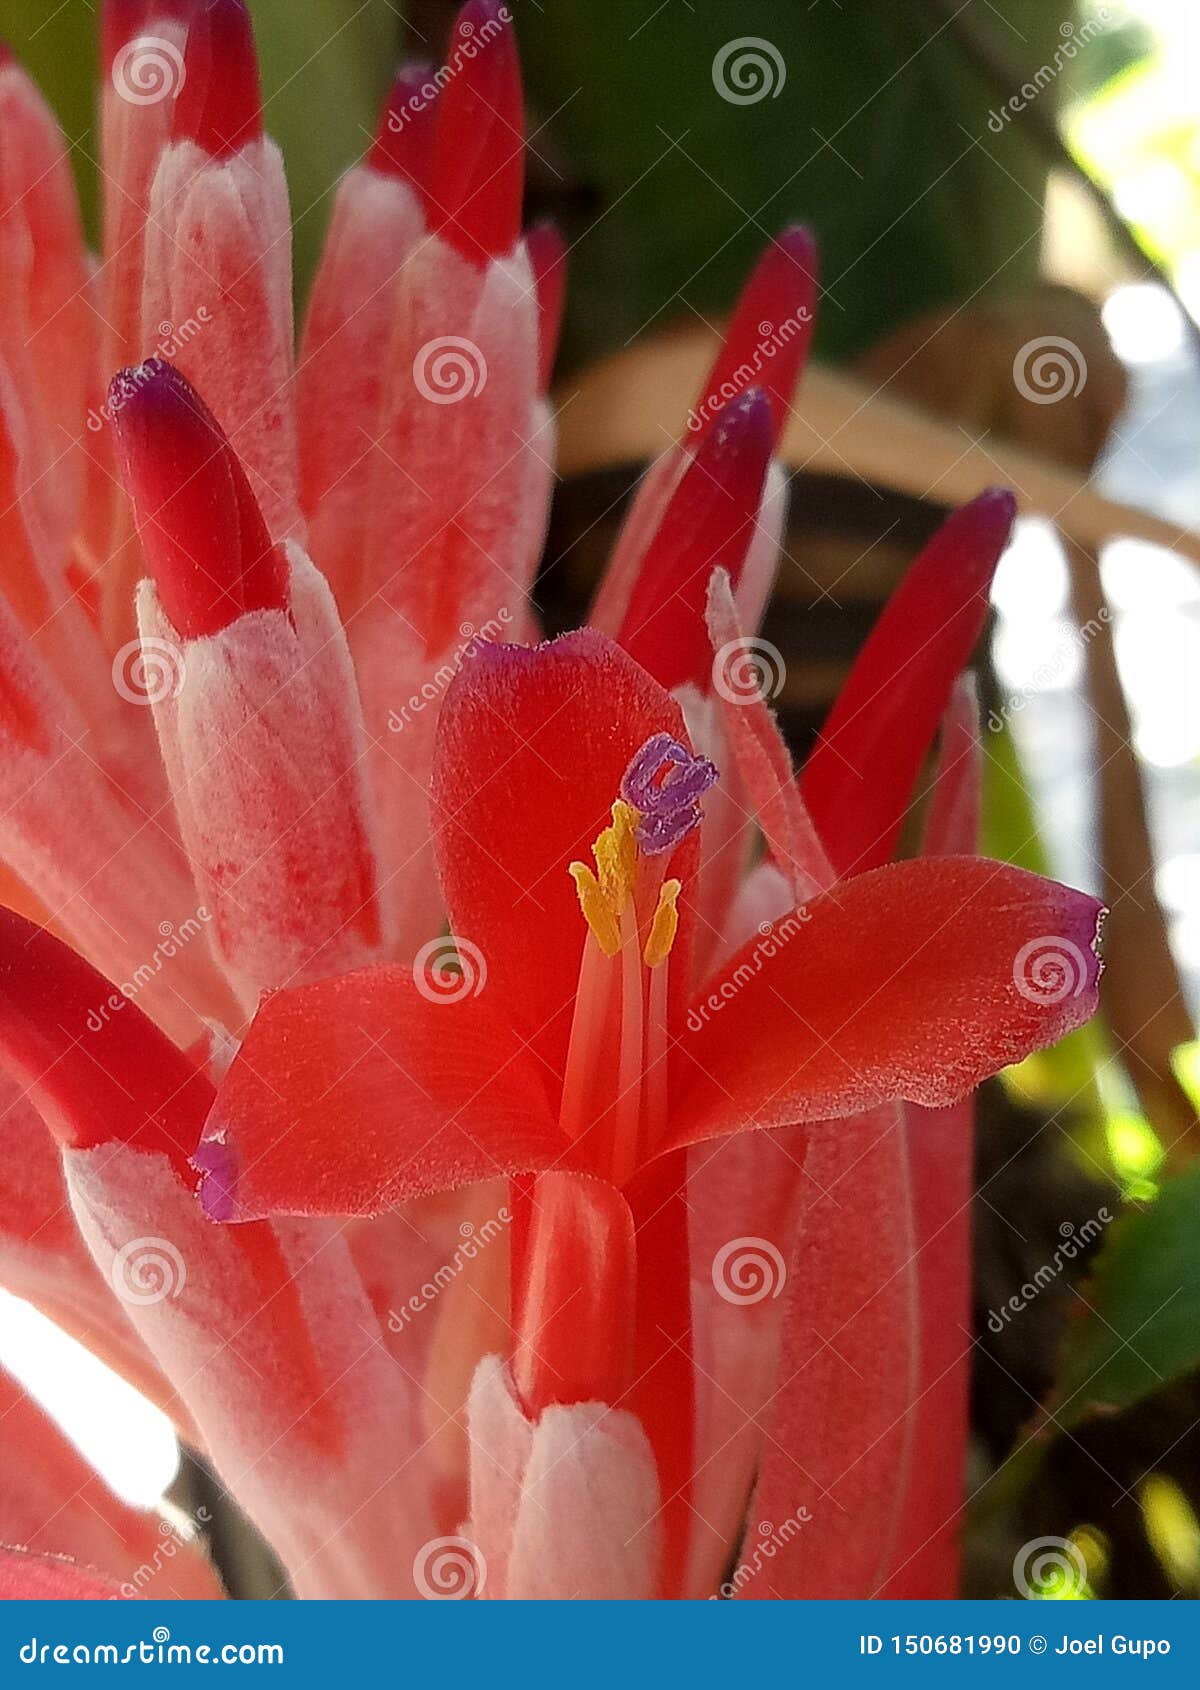 A Beautiful Tropical Flower Blooming Stock Photo - Image of blooming ...